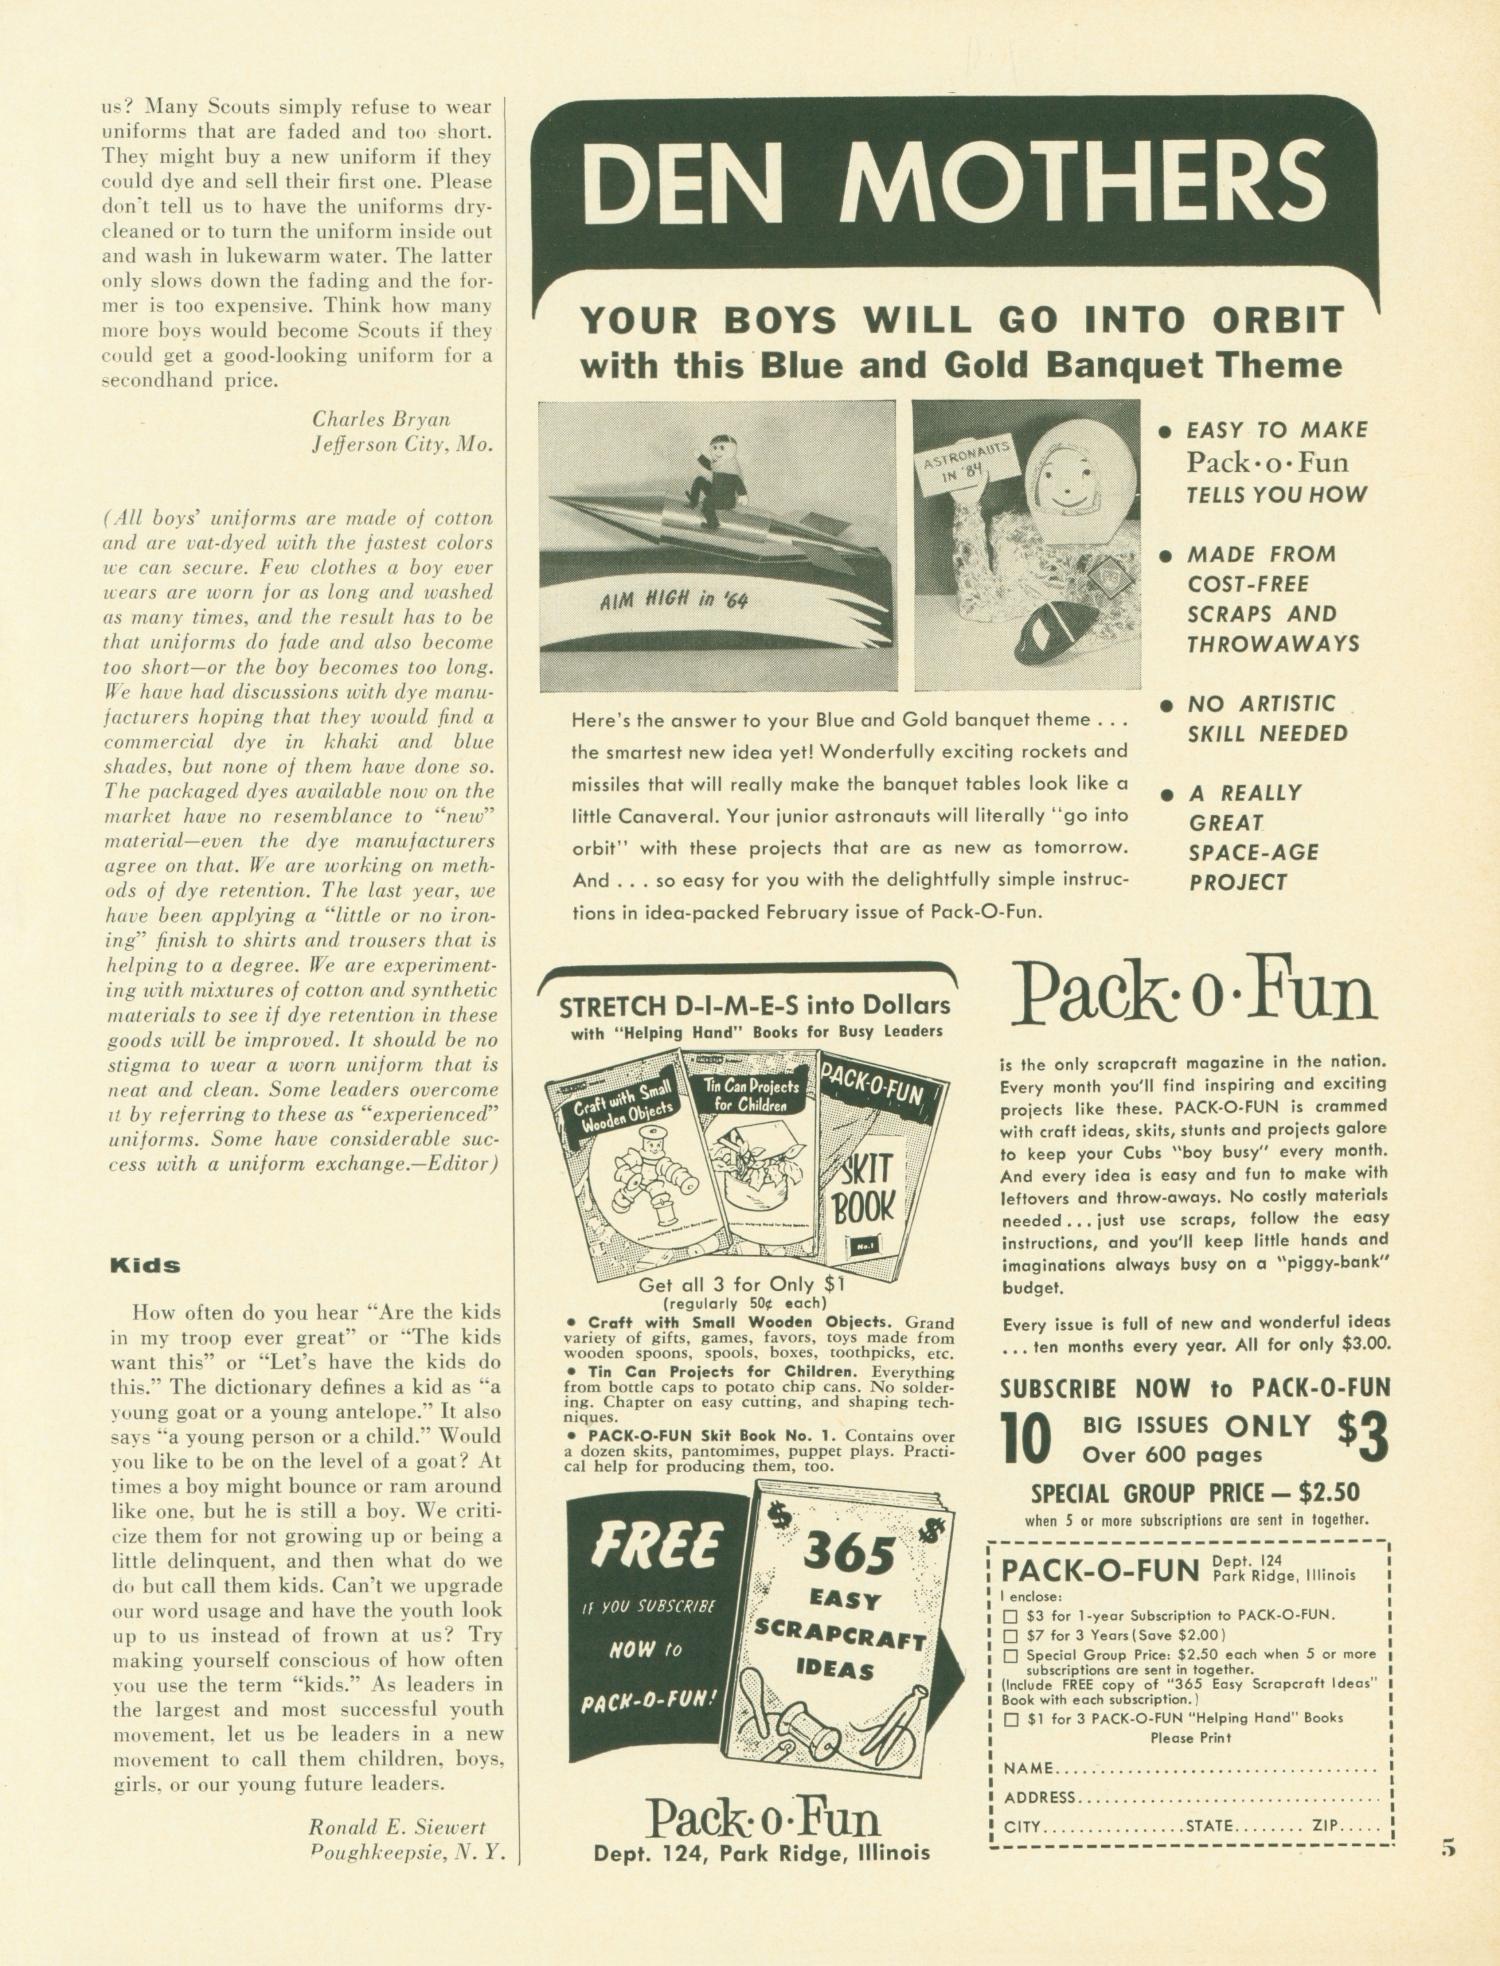 Scouting, Volume 52, Number 2, February 1964
                                                
                                                    5
                                                